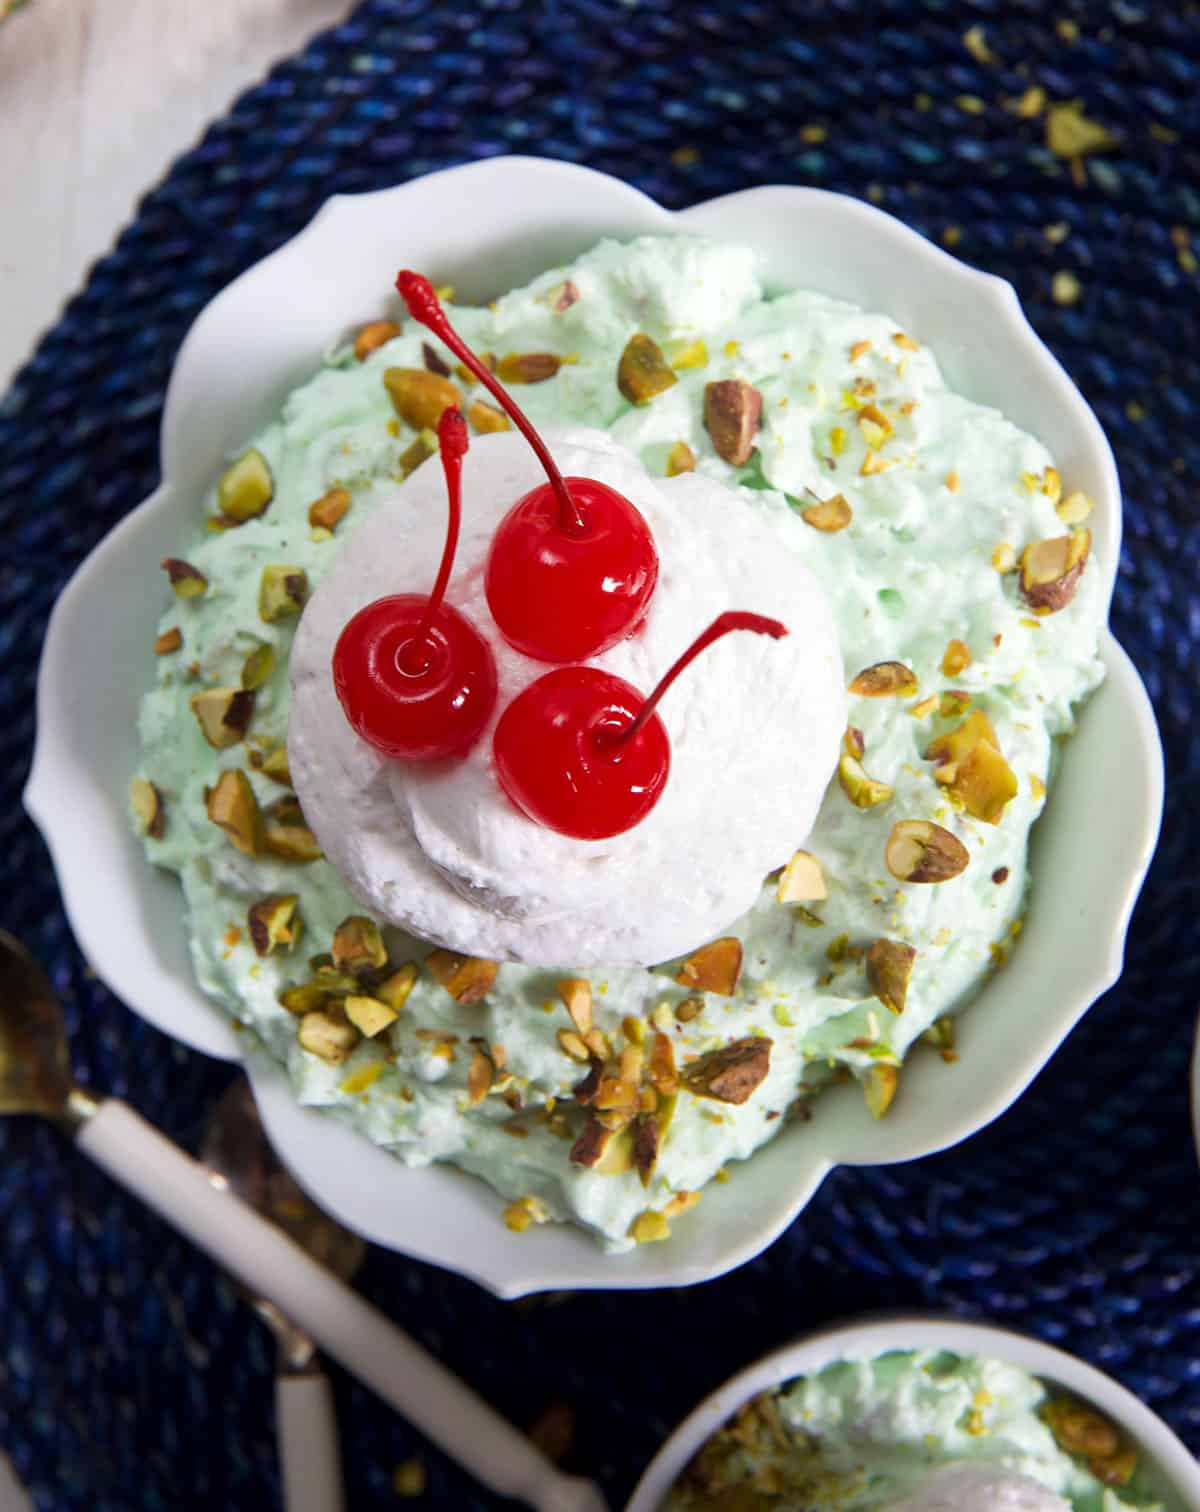 Whipped cream and cherries top a bowl full of watergate salad.